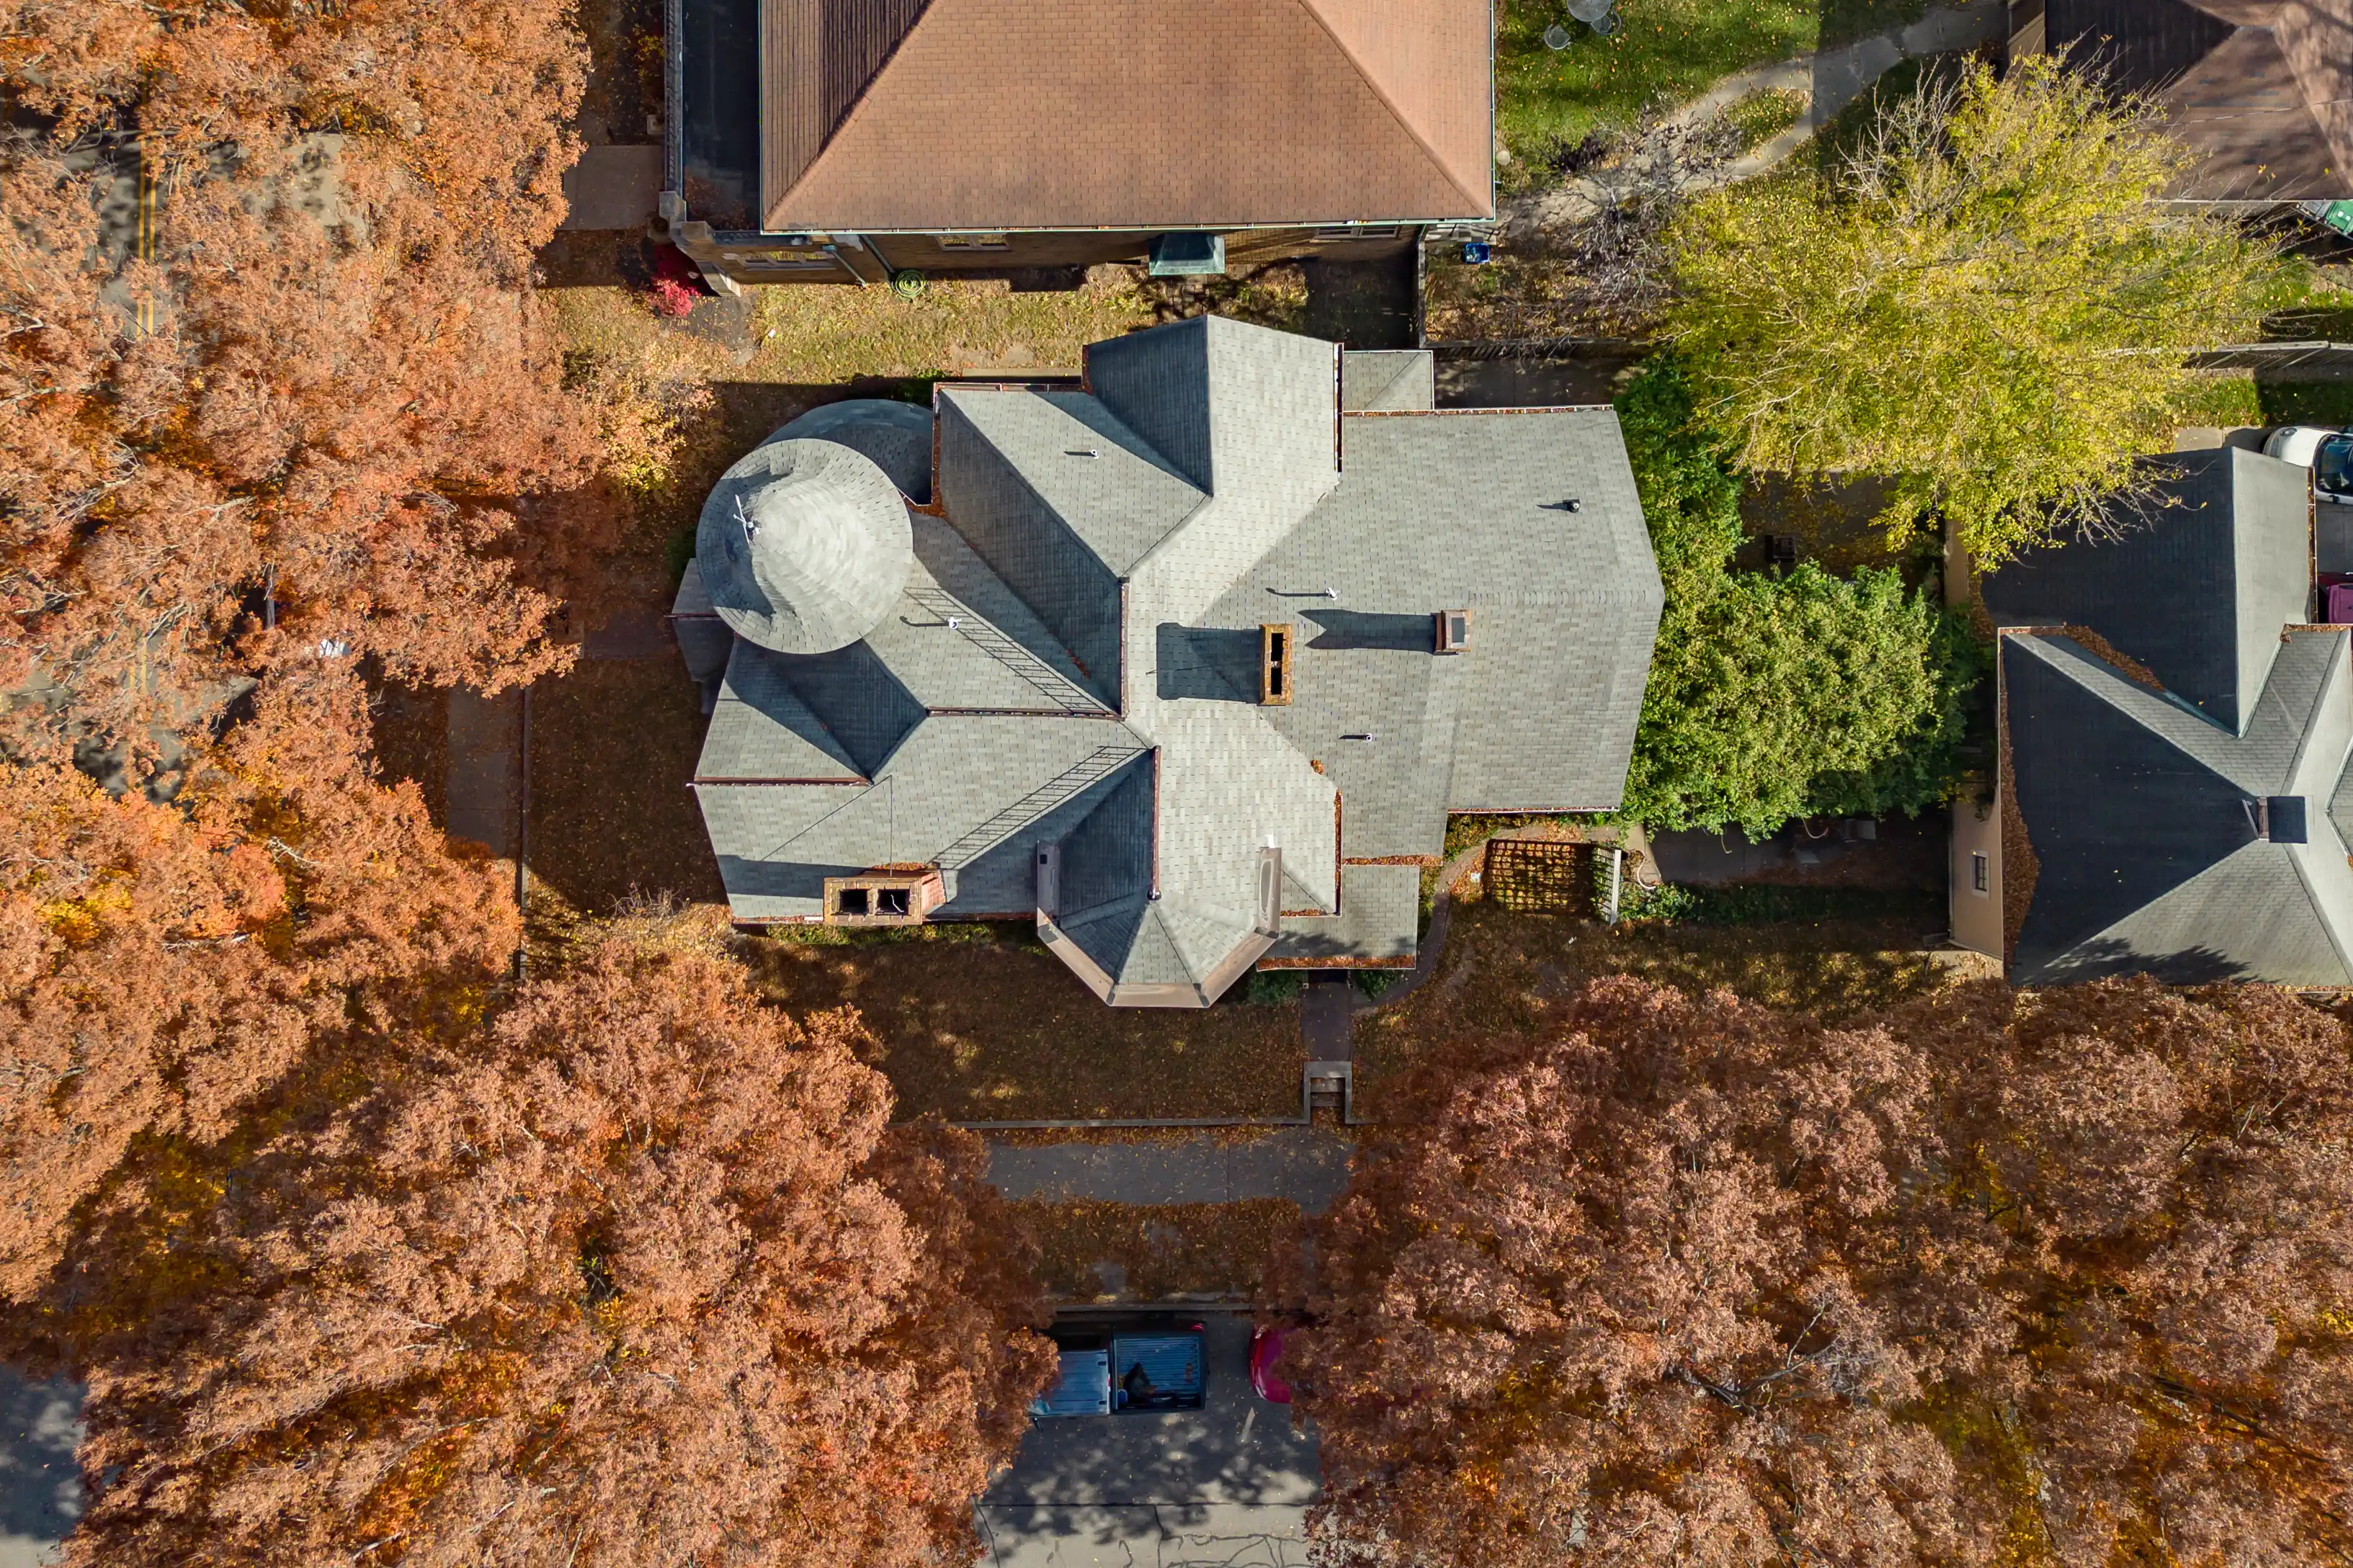 Aerial view of a residential house with a complex gray roof and surrounding autumn-colored trees.